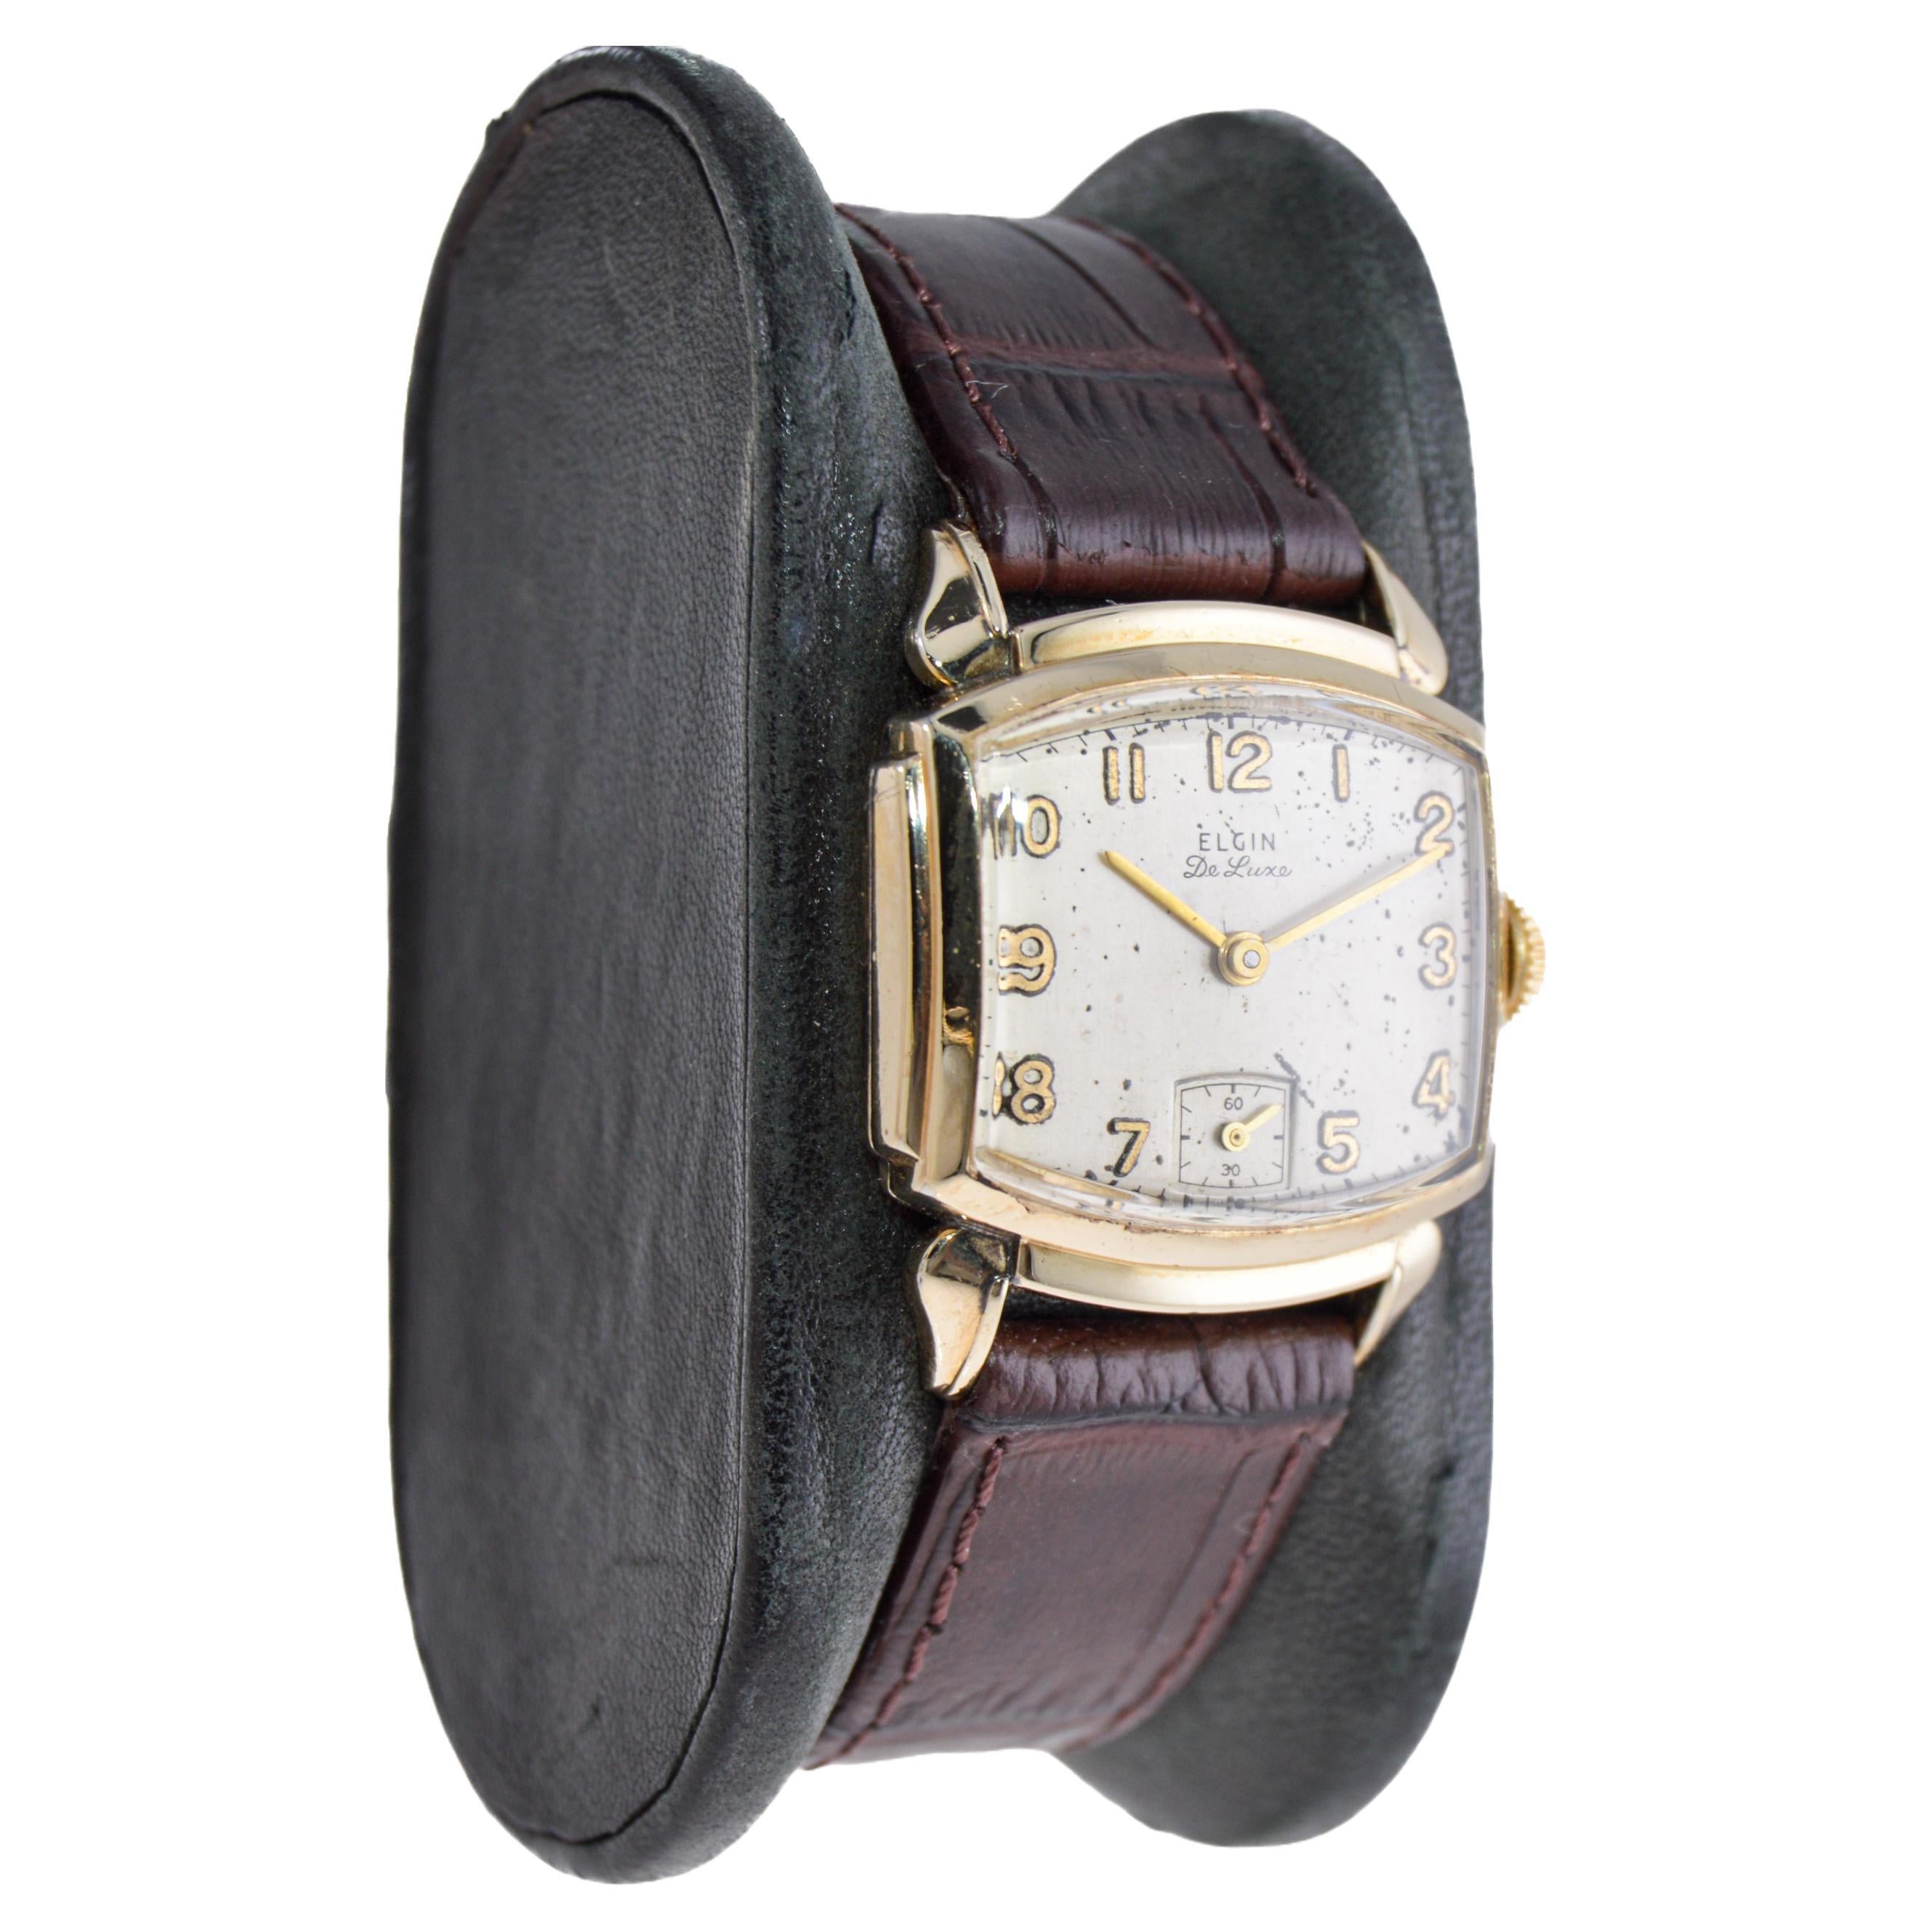 FACTORY / HOUSE: Elgin Watch Company
STYLE / REFERENCE: Art Deco / Modified Tortue Shape
METAL / MATERIAL: Yellow Gold-Filled
CIRCA / YEAR: 1940's
DIMENSIONS / SIZE: 32mm Length X 26mm Diameter
MOVEMENT / CALIBER: Manual Winding / 17 Jewels  
DIAL /